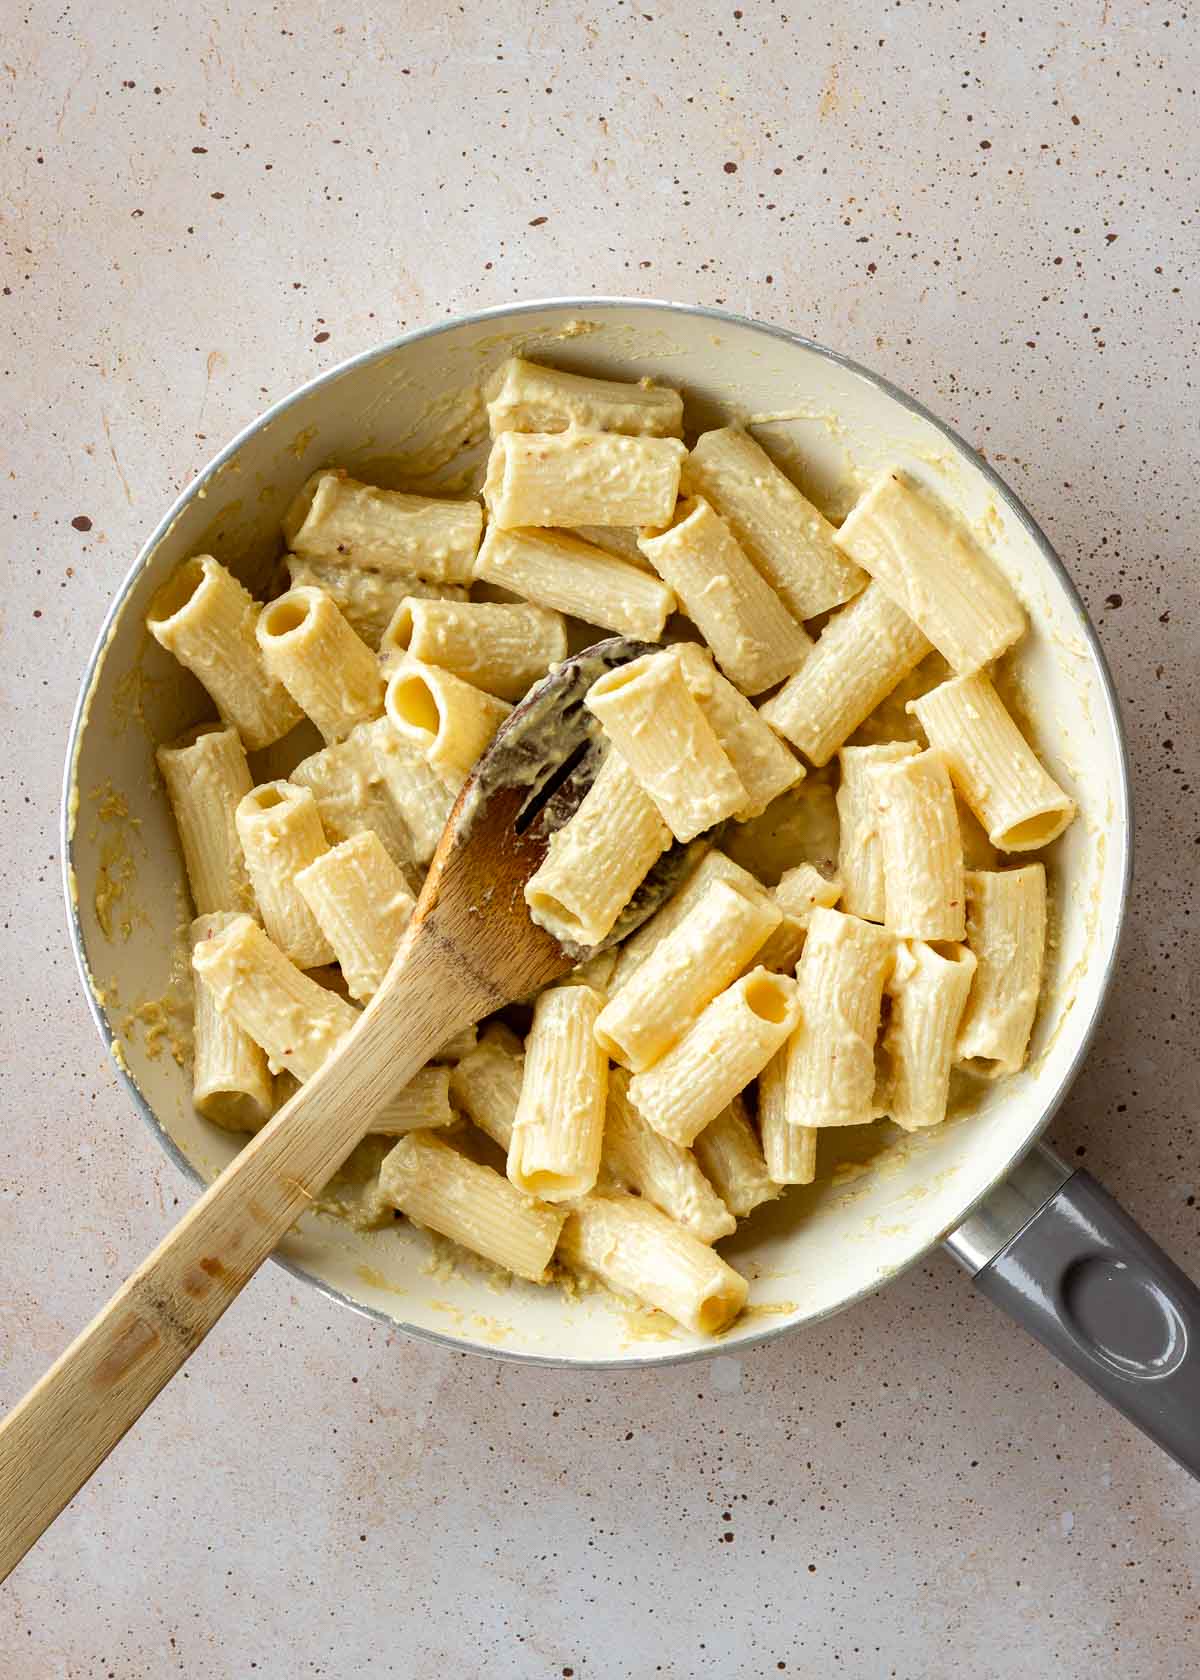 Pasta covered in tahini sauce cooks in a skillet, with a wooden spoon nestled in it.